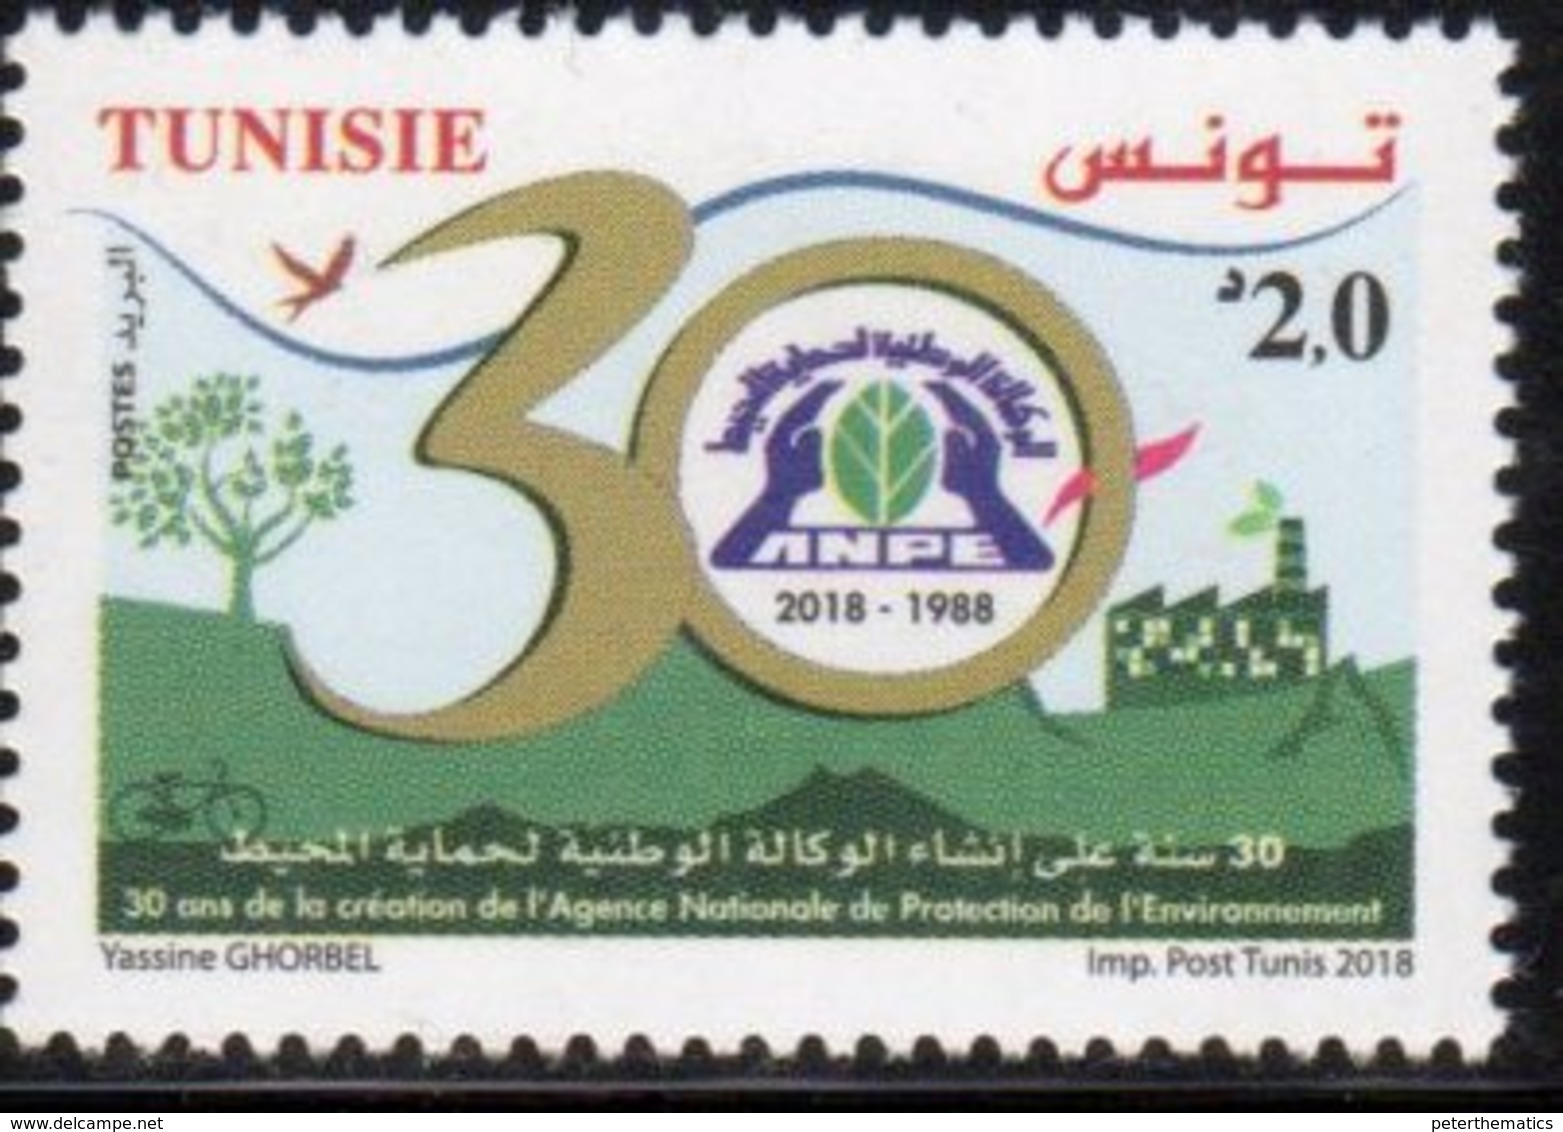 TUNISIA, 2018, MNH, ENVIRONMENT PROTECTION AGENCY, TREES, BIRDS, INDUSTRY,  1v - Protection De L'environnement & Climat